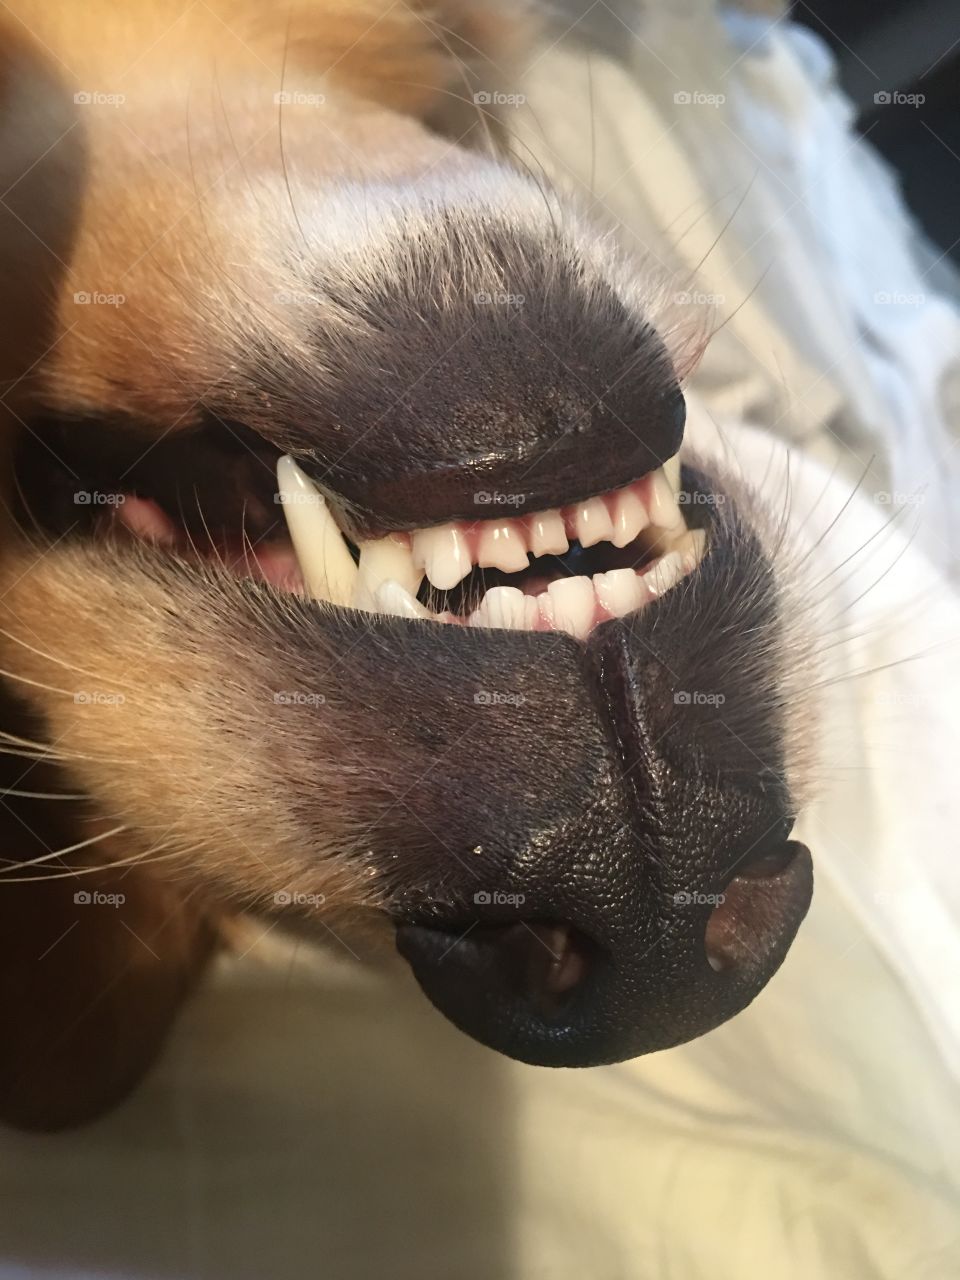 Dog mouth teeth and nose 